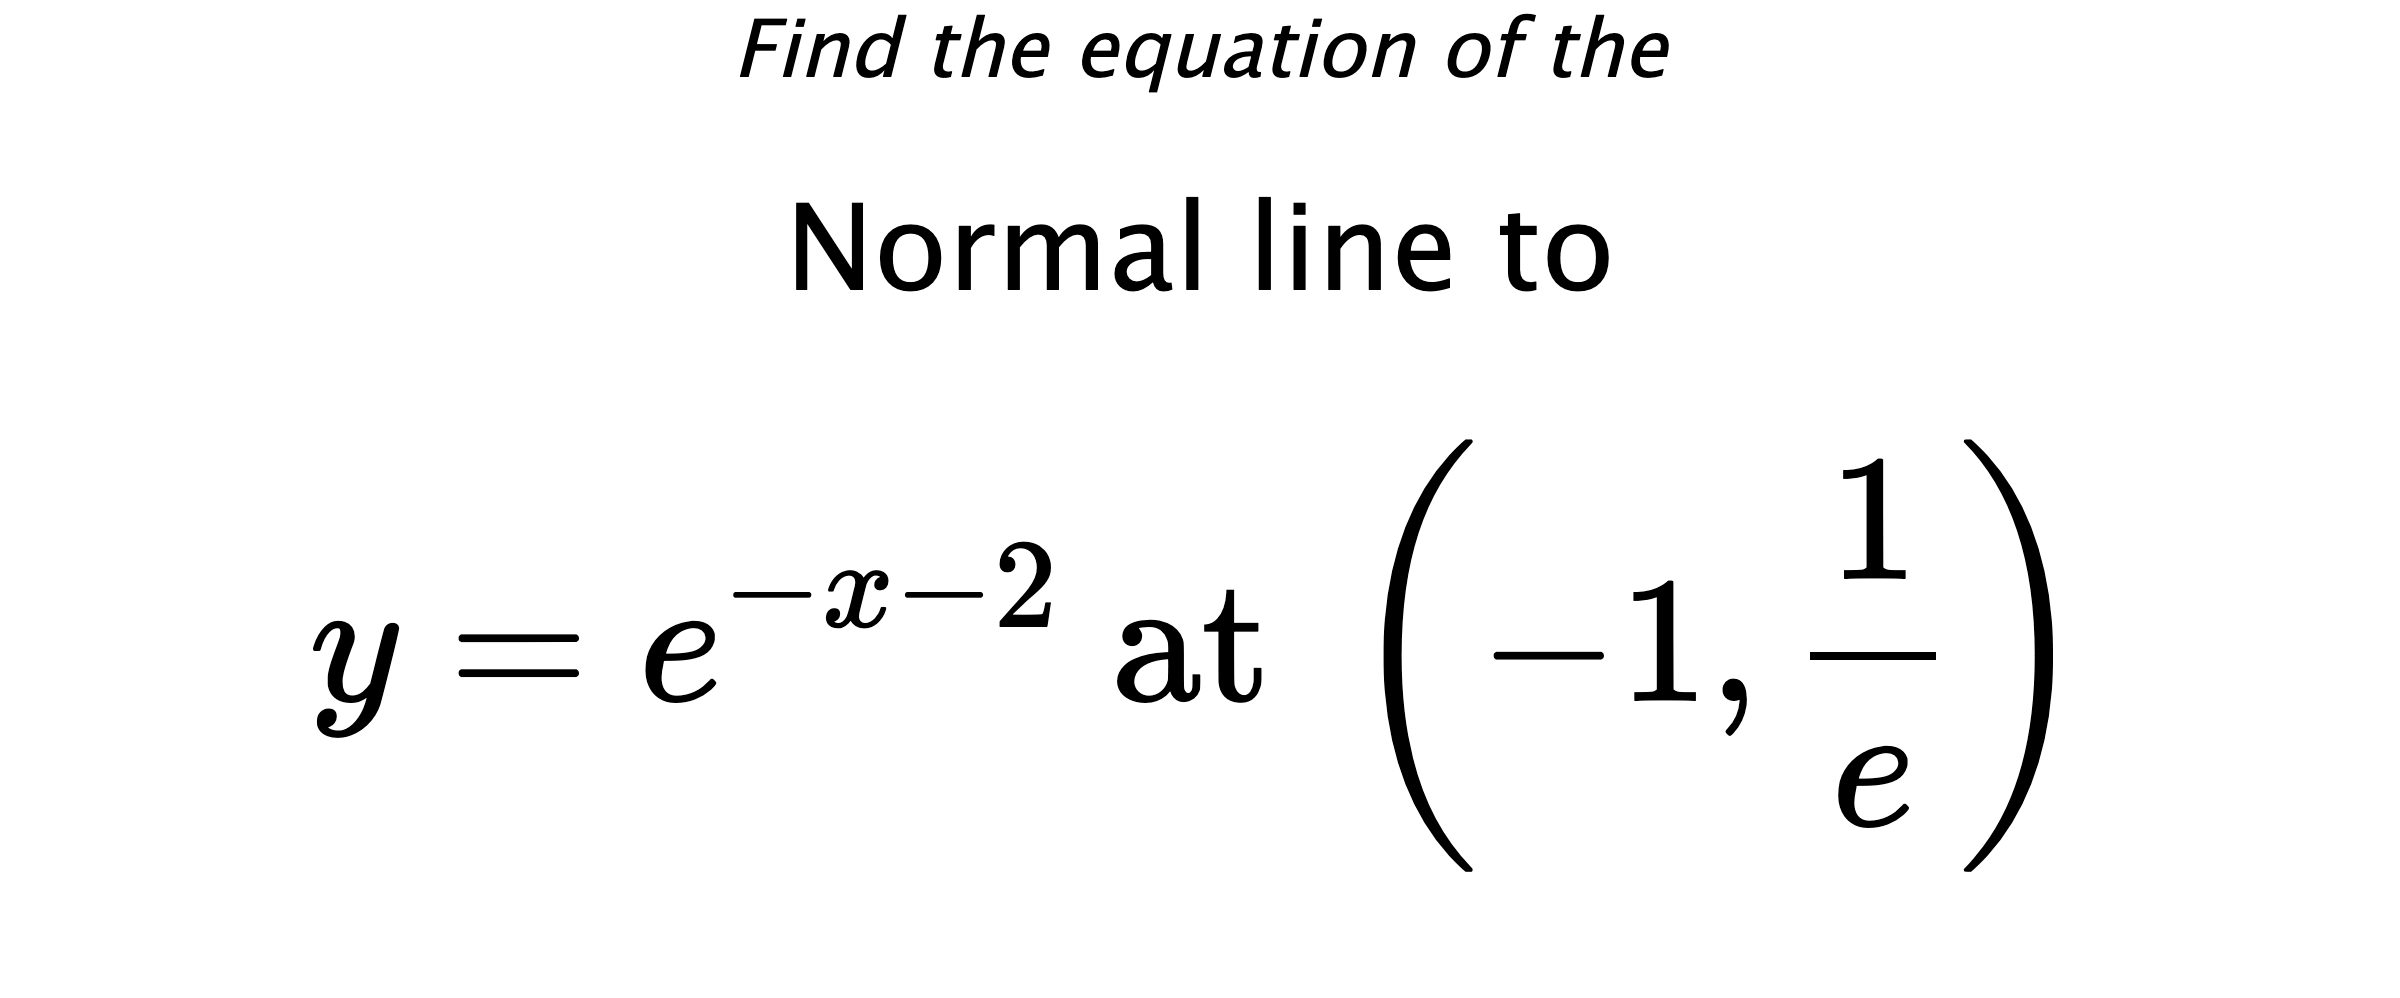 Find the equation of the Normal line to $$ y=e^{-x-2} \text{ at } \left(-1,\frac{1}{e}\right) $$